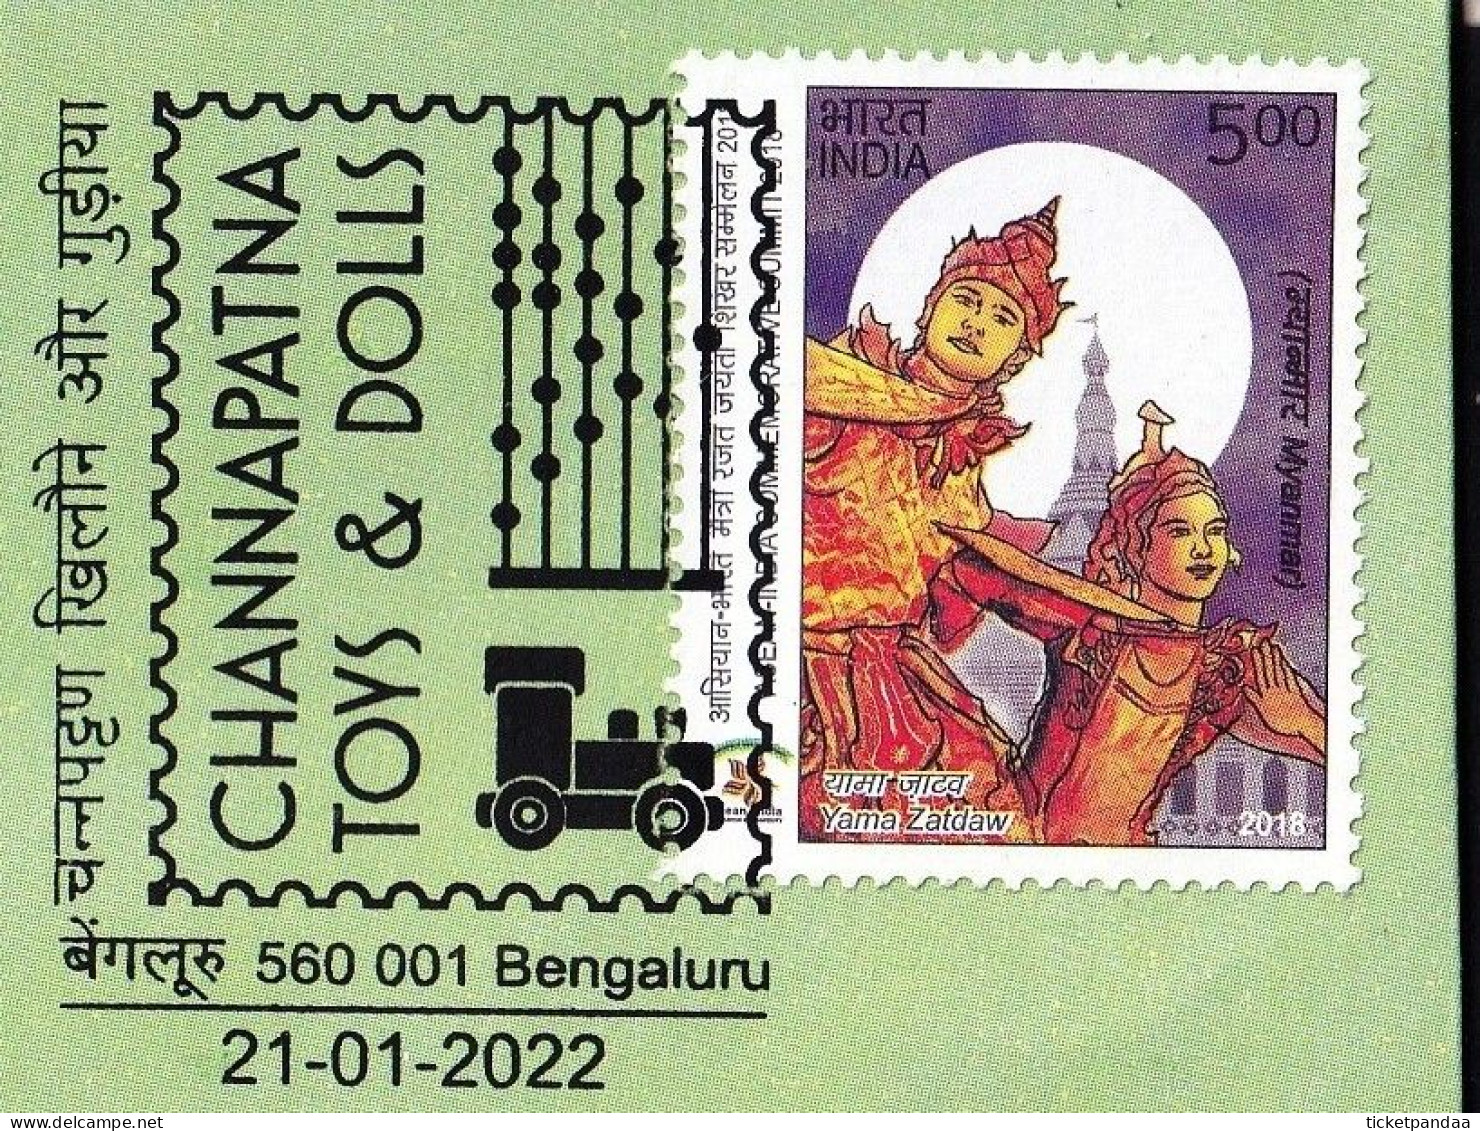 TOYS AND DOLLS- CHANNAPATNA TOYS - PICTORIAL POSTMARK- SPECIAL COVER-INDIA-BX4-31 - Marionetas